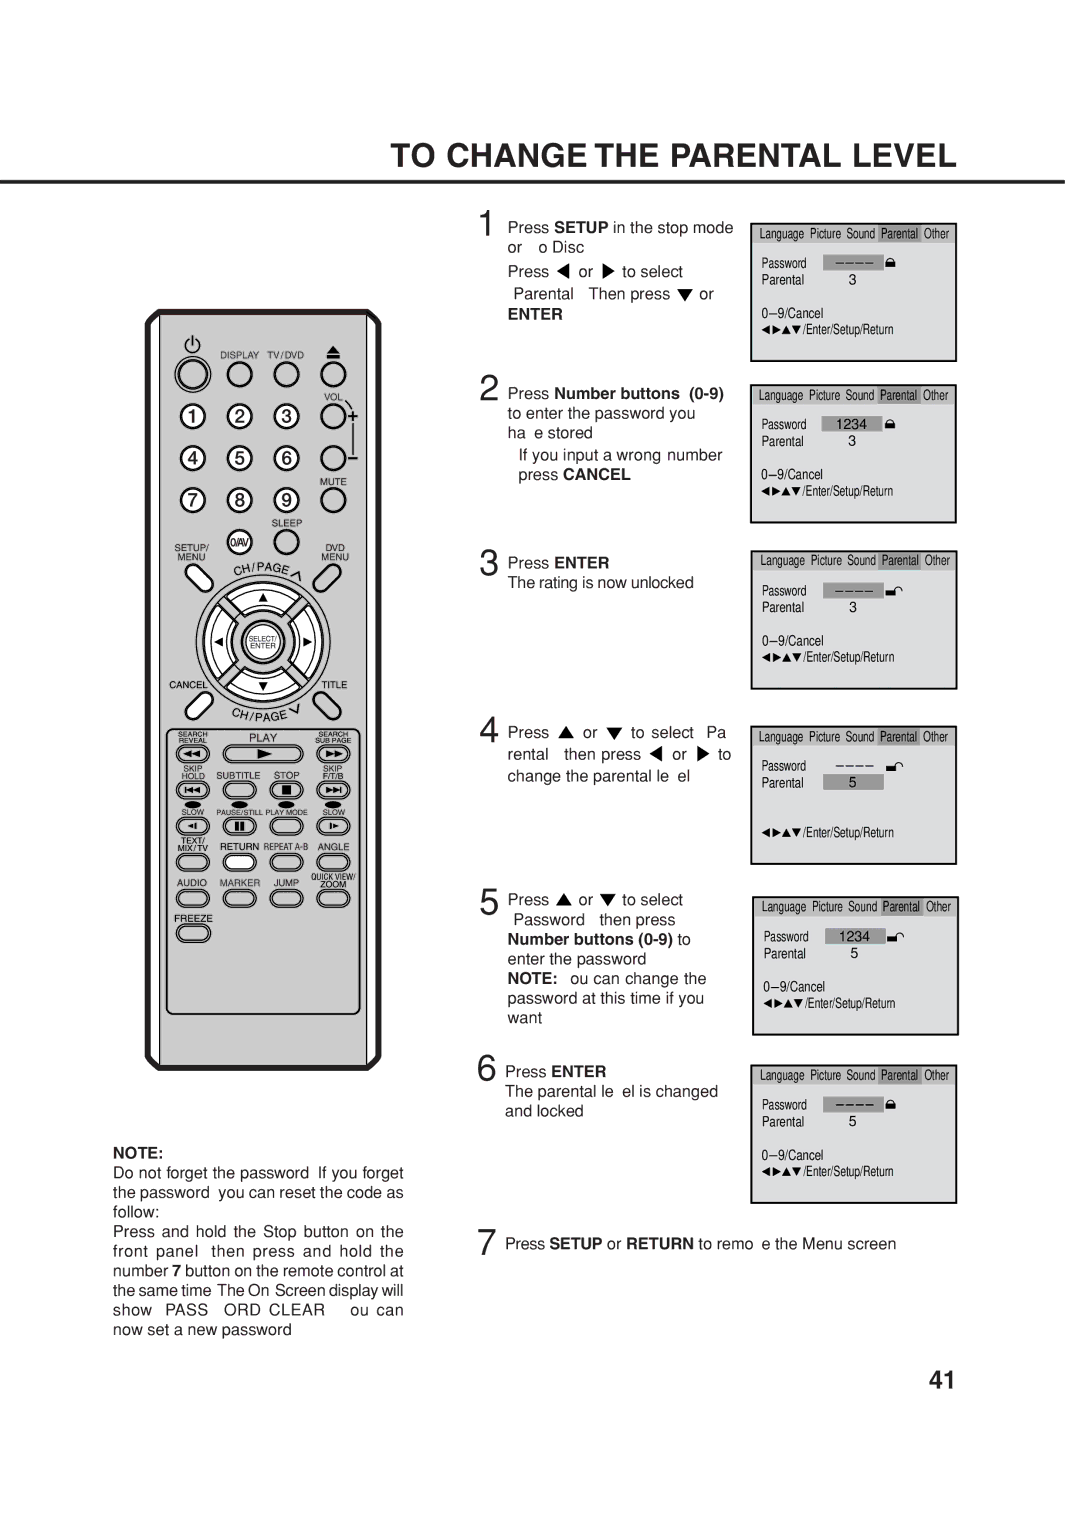 Orion 14LD manual To Change the Parental Level, Number buttons 0-9 to 